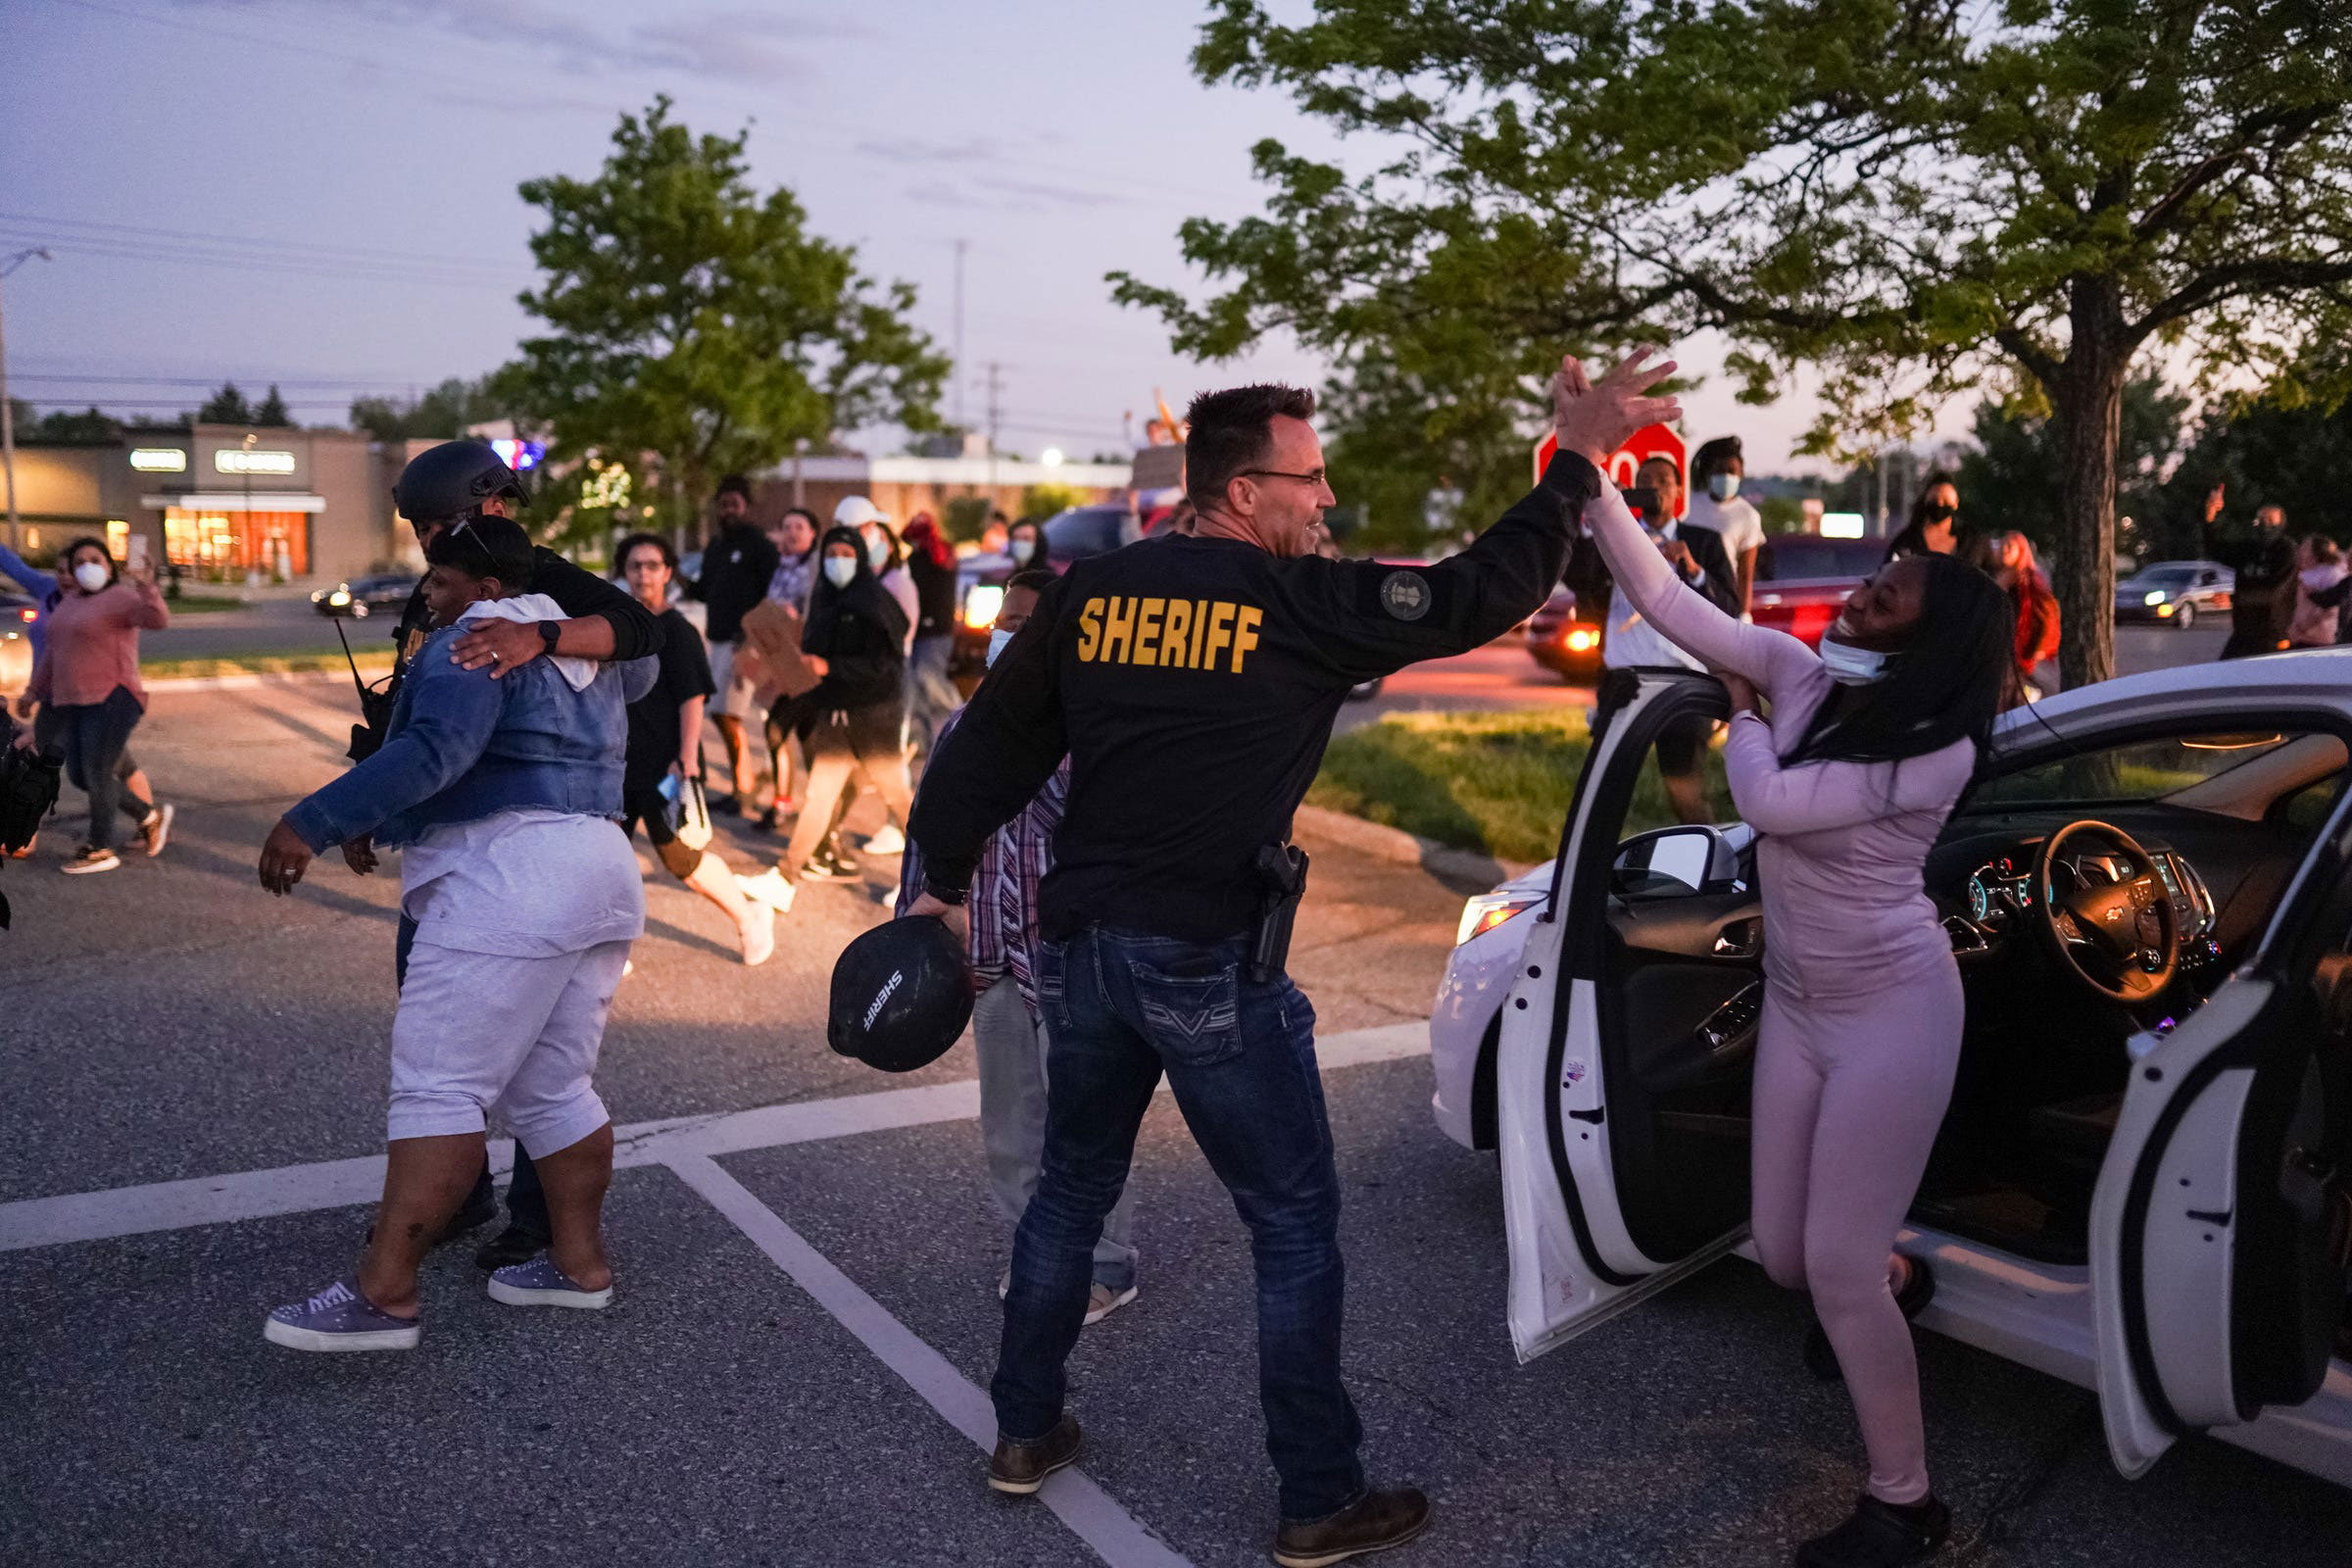 Genesee County Sheriff Chris Swanson high fives a woman who called his name as he marches with protesters in Flint, Michigan, on May 30.